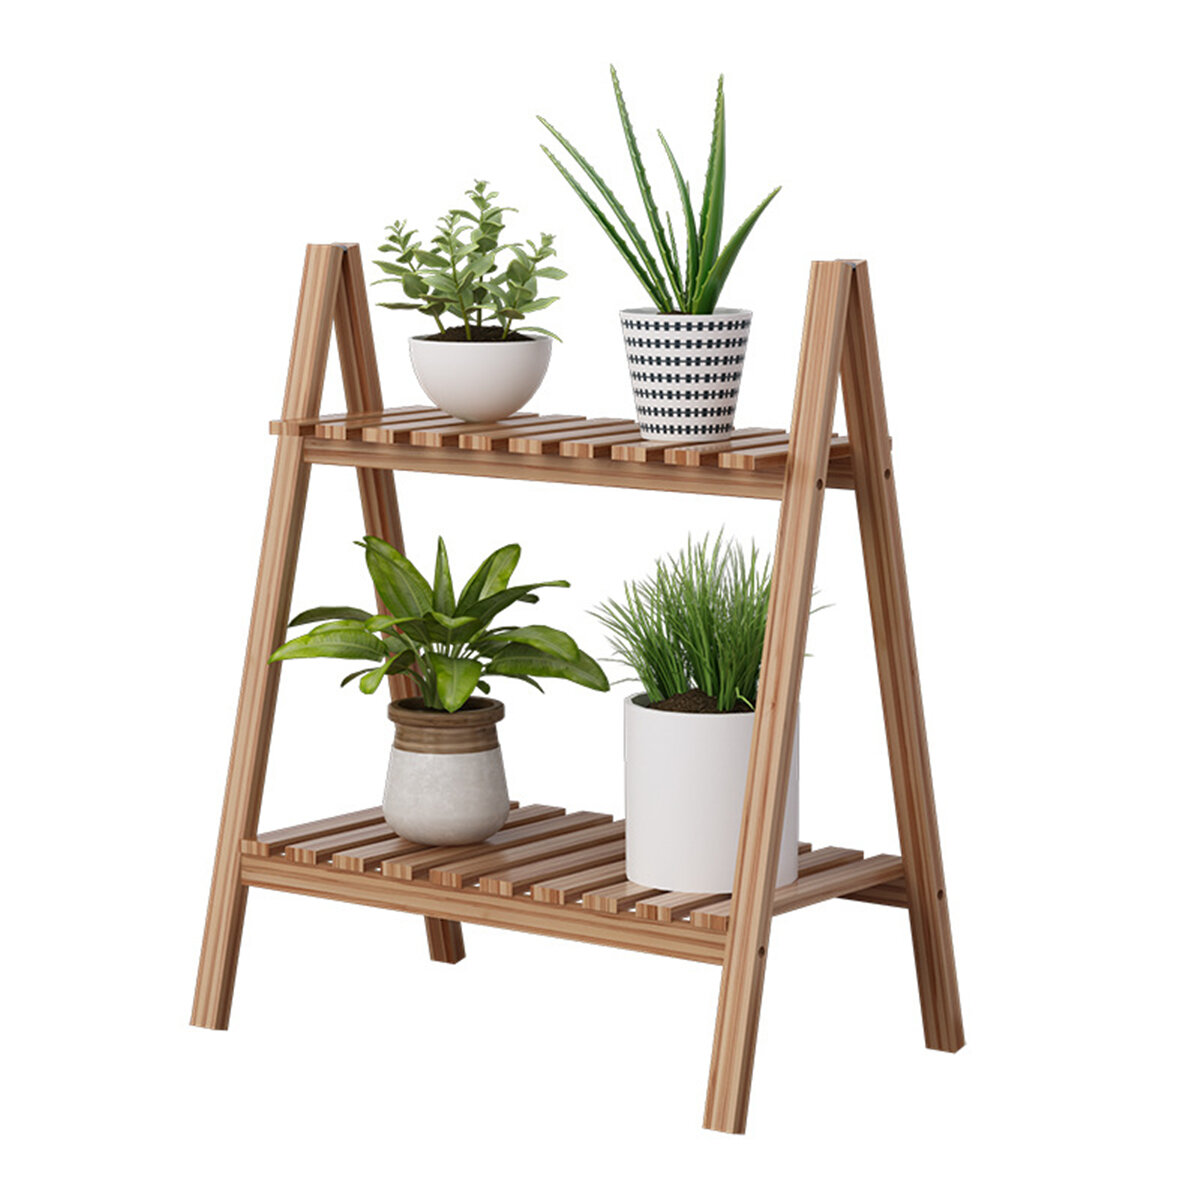 Image of 2 Layers Flower Racks Foldable Wood Plant Stand A-shape Indoor Landing Shelf for Home Balcony